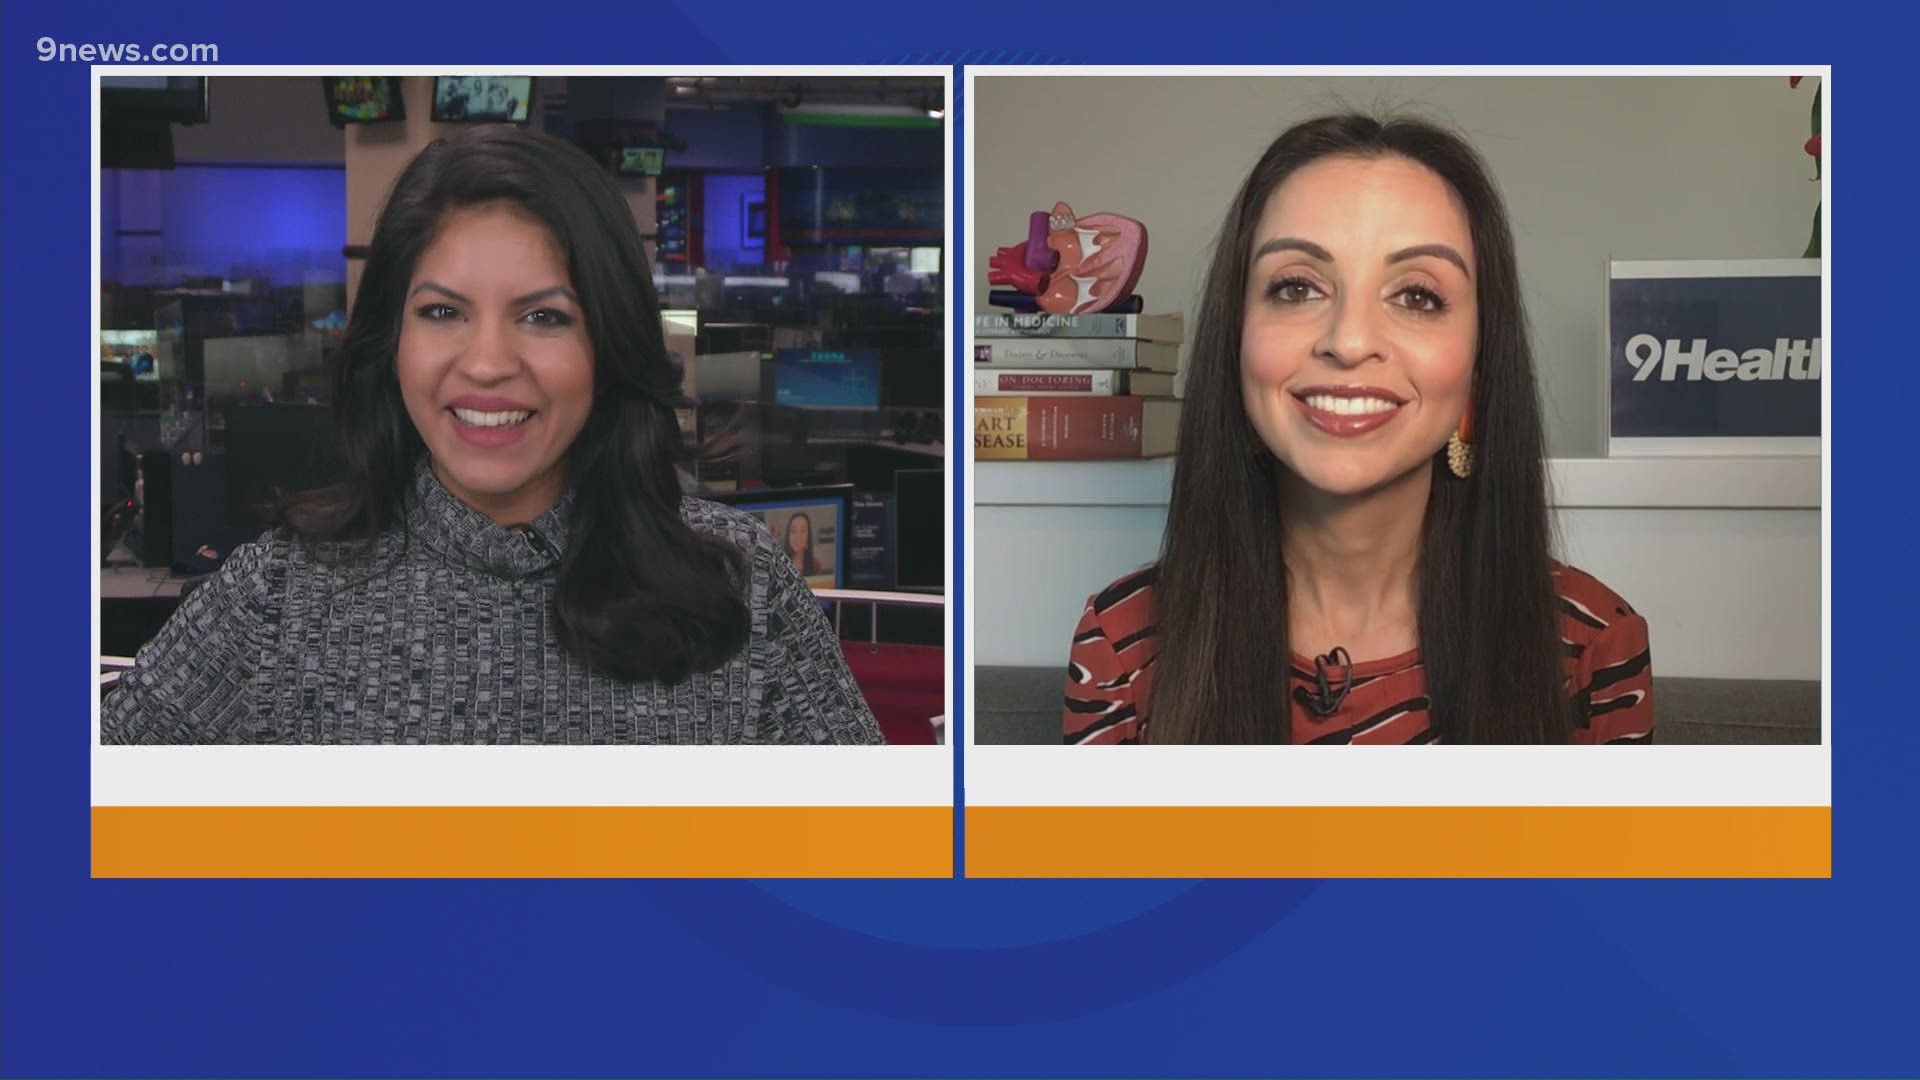 9HEALTH expert Dr. Payal Kohli talks about the one-dose vaccine that got FDA approval on Saturday for emergency use.